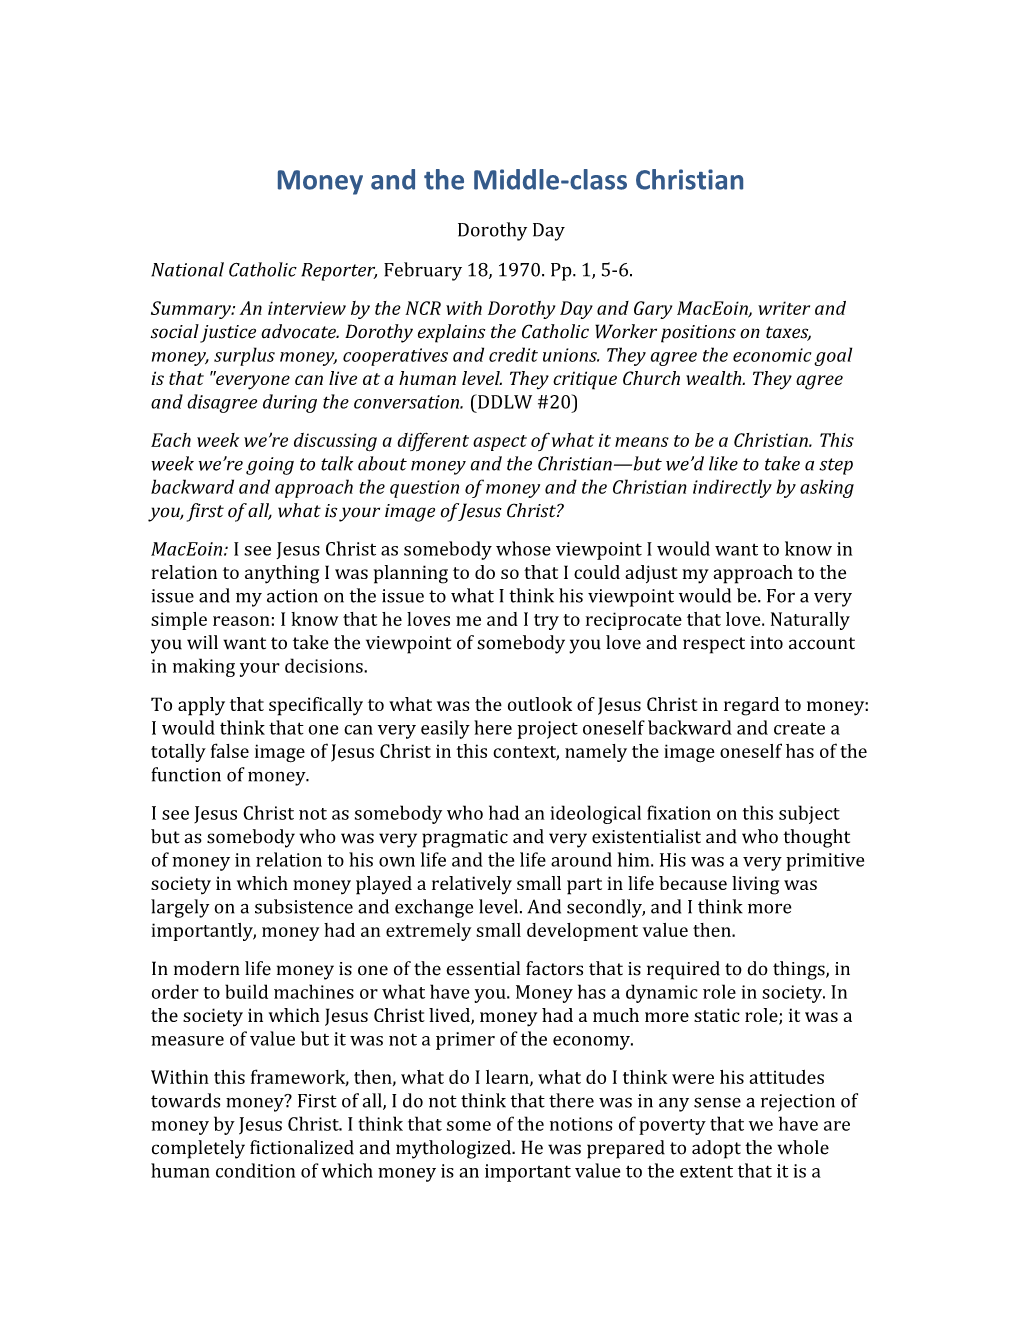 Money and the Middle-Class Christian